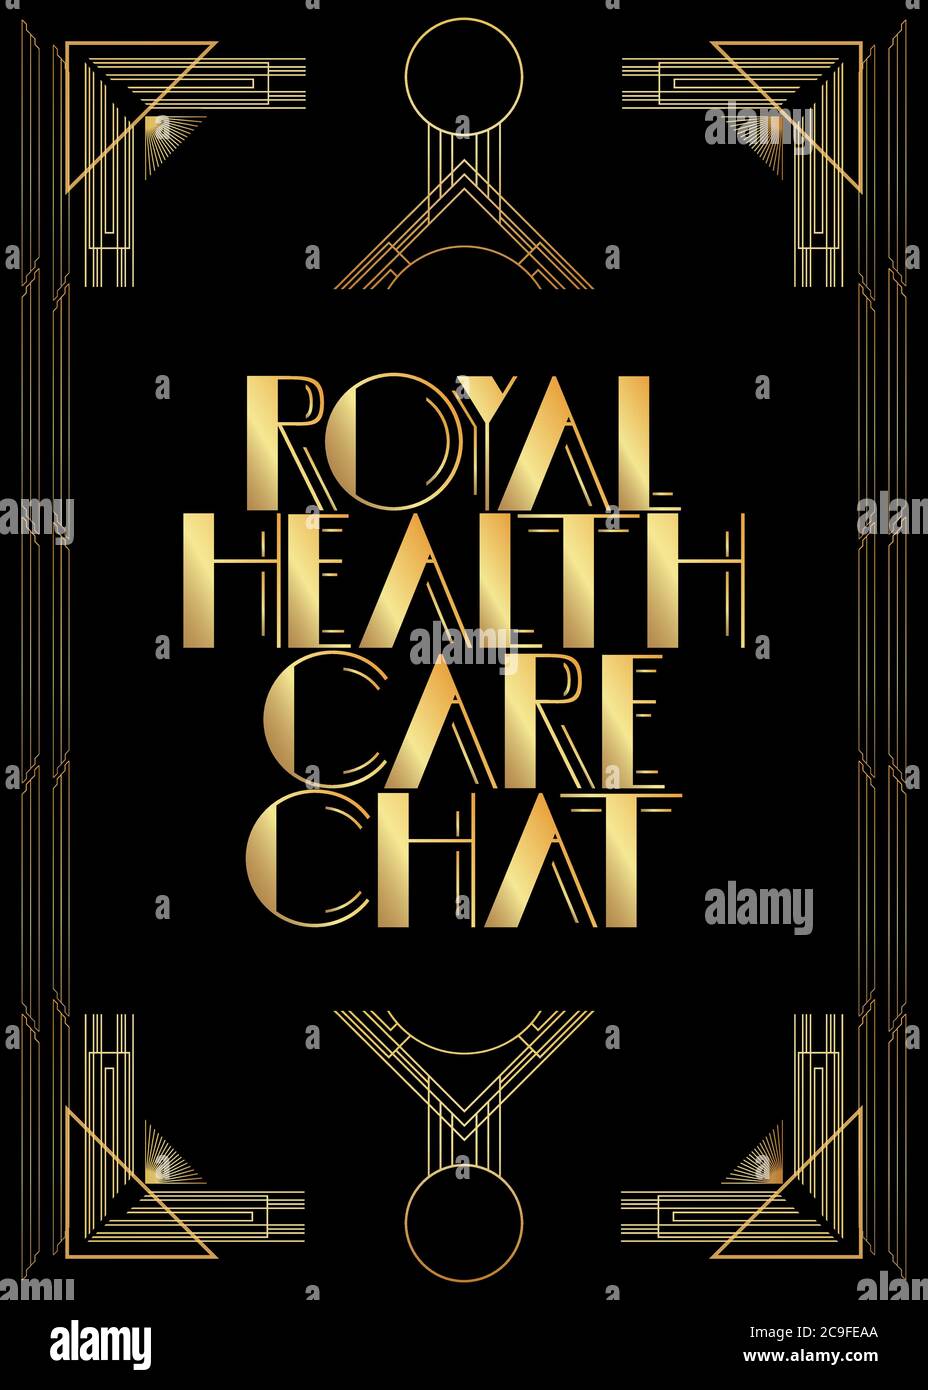 Art Deco Retro Royal Health Care Chat text. Decorative greeting card, sign with vintage letters. Stock Vector